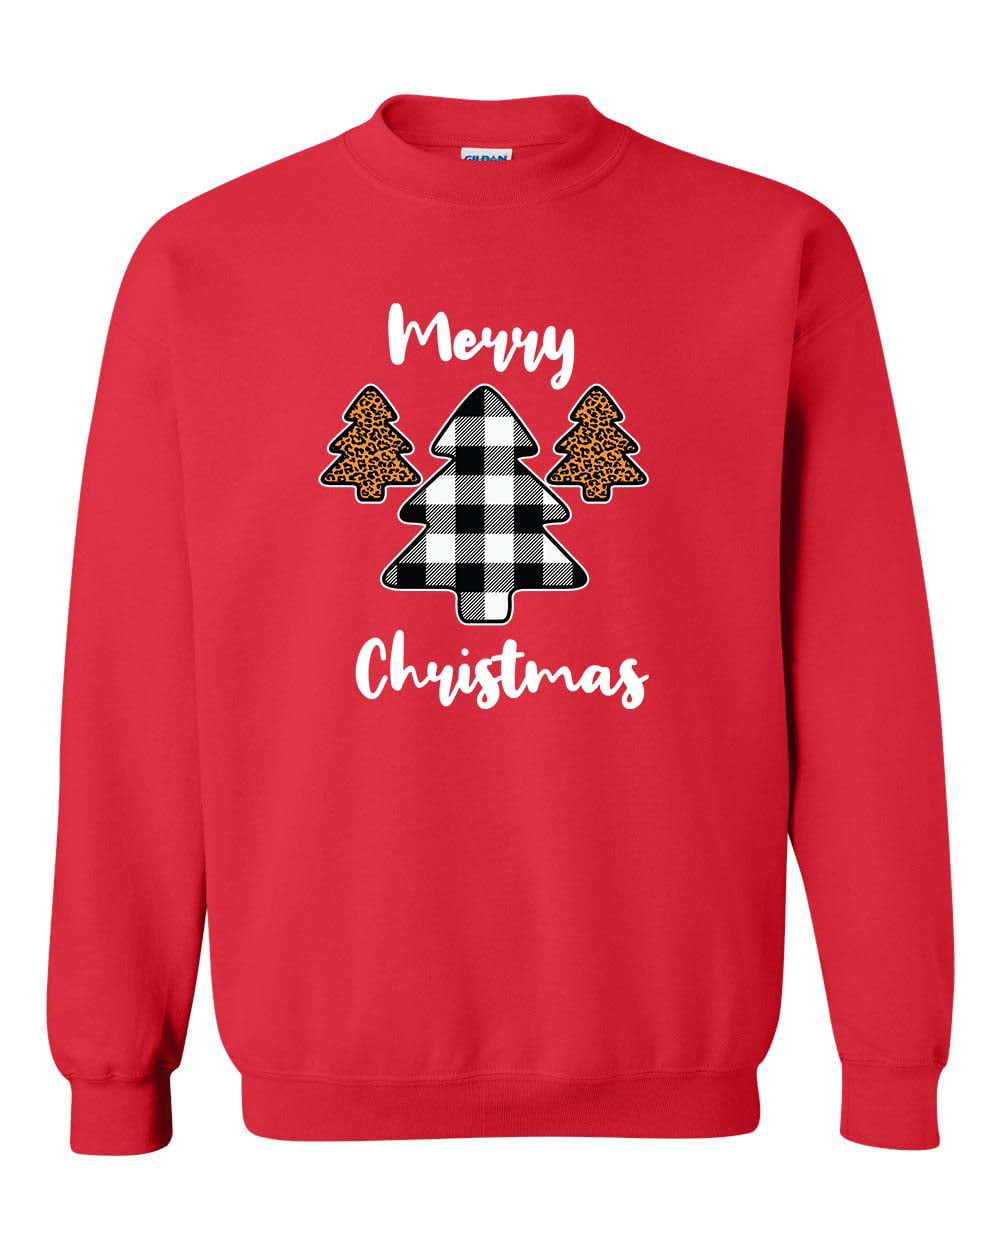 Christmas holiday comfy clothes leopard print Most wonderful time of year uncommon crew sweatshirt plus size Black & white buffalo plaid